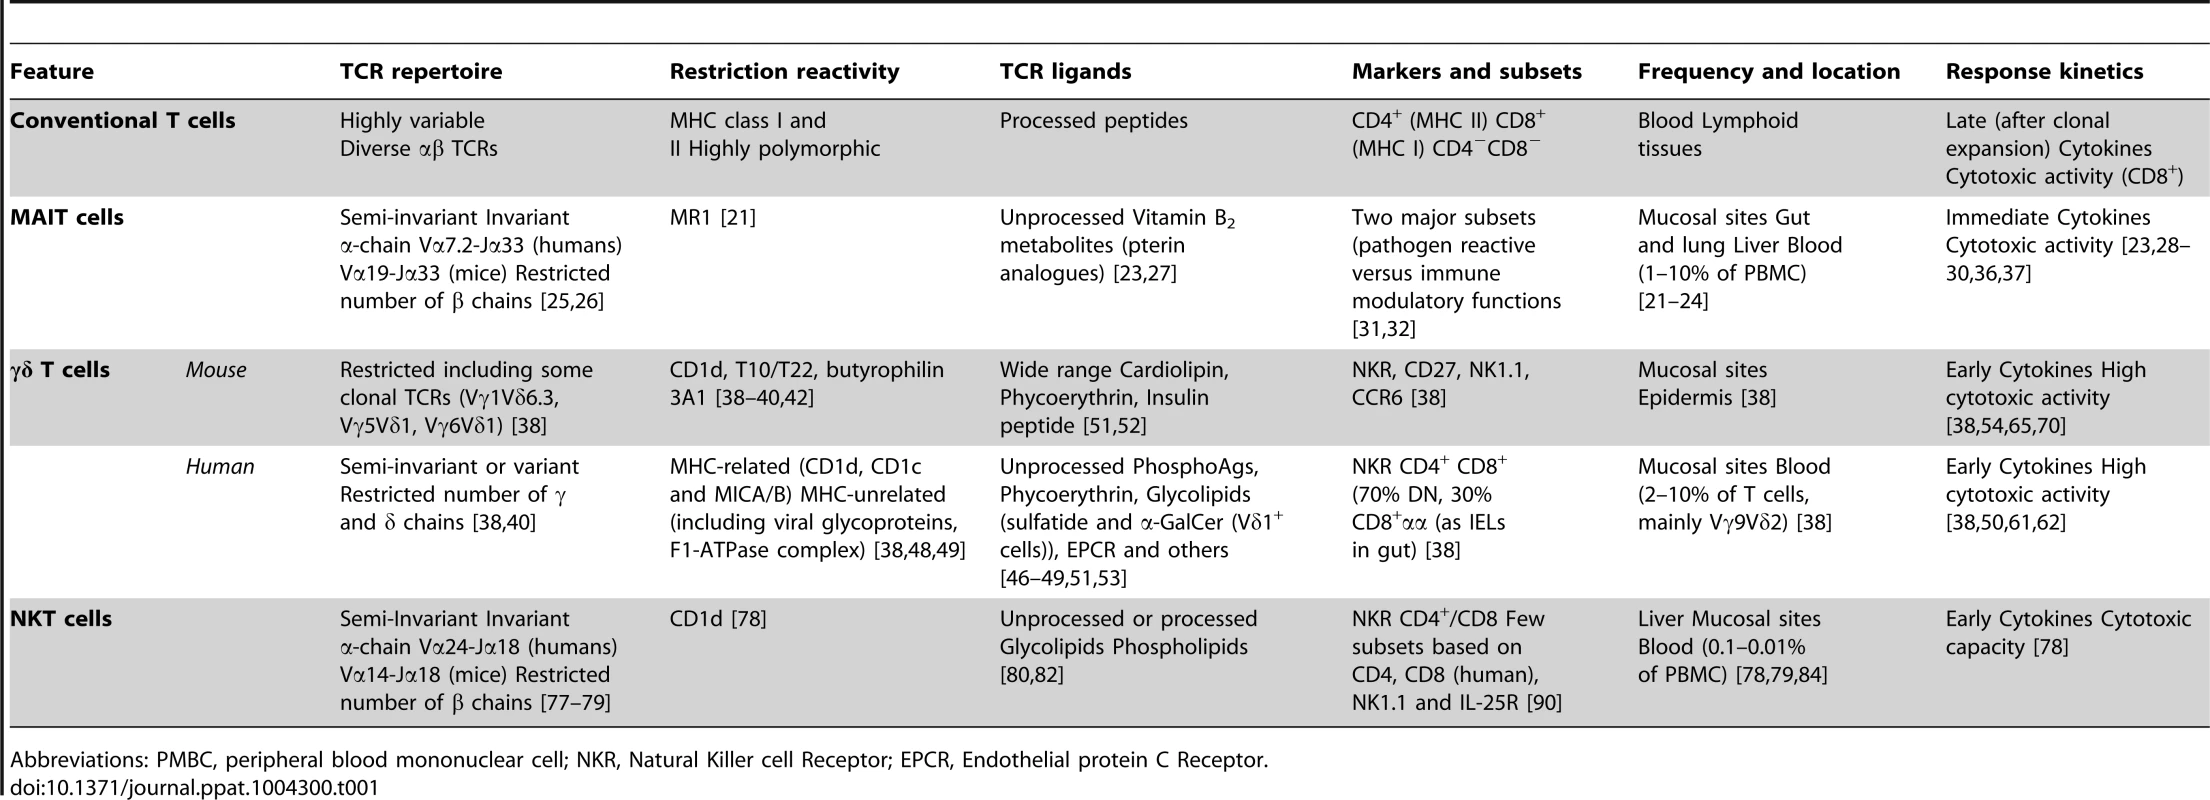 Differences between conventional T cells and non-conventional T cells.